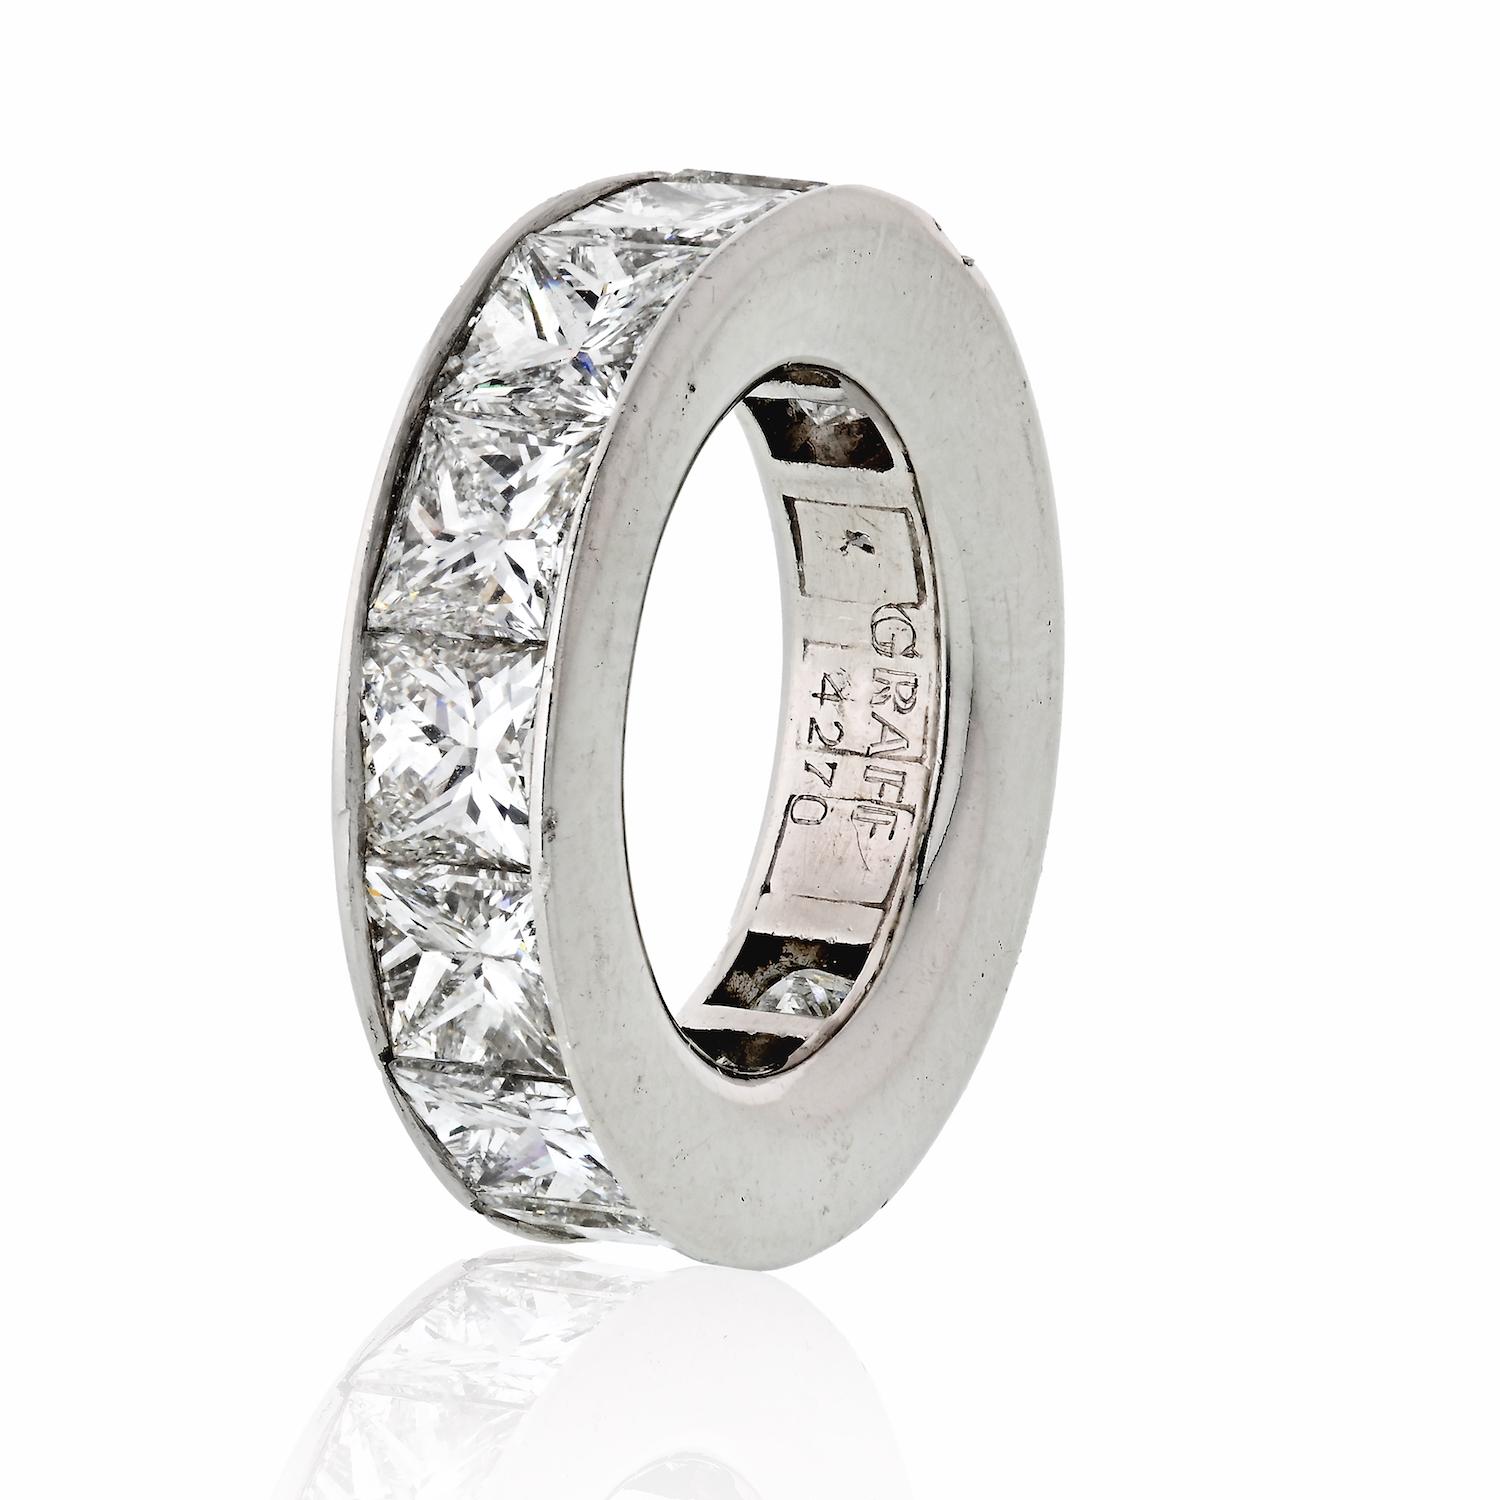 An important diamond eternity band by GRAFF is mounted with 14 princess-cut diamonds of D to F in color and VVS1-VVS2 clarity. The total carat weight of the ring is 14.30cts. 
Current finger size 6.5.
Original GRAFF box. 

Size 6.5 
Width: 6mm